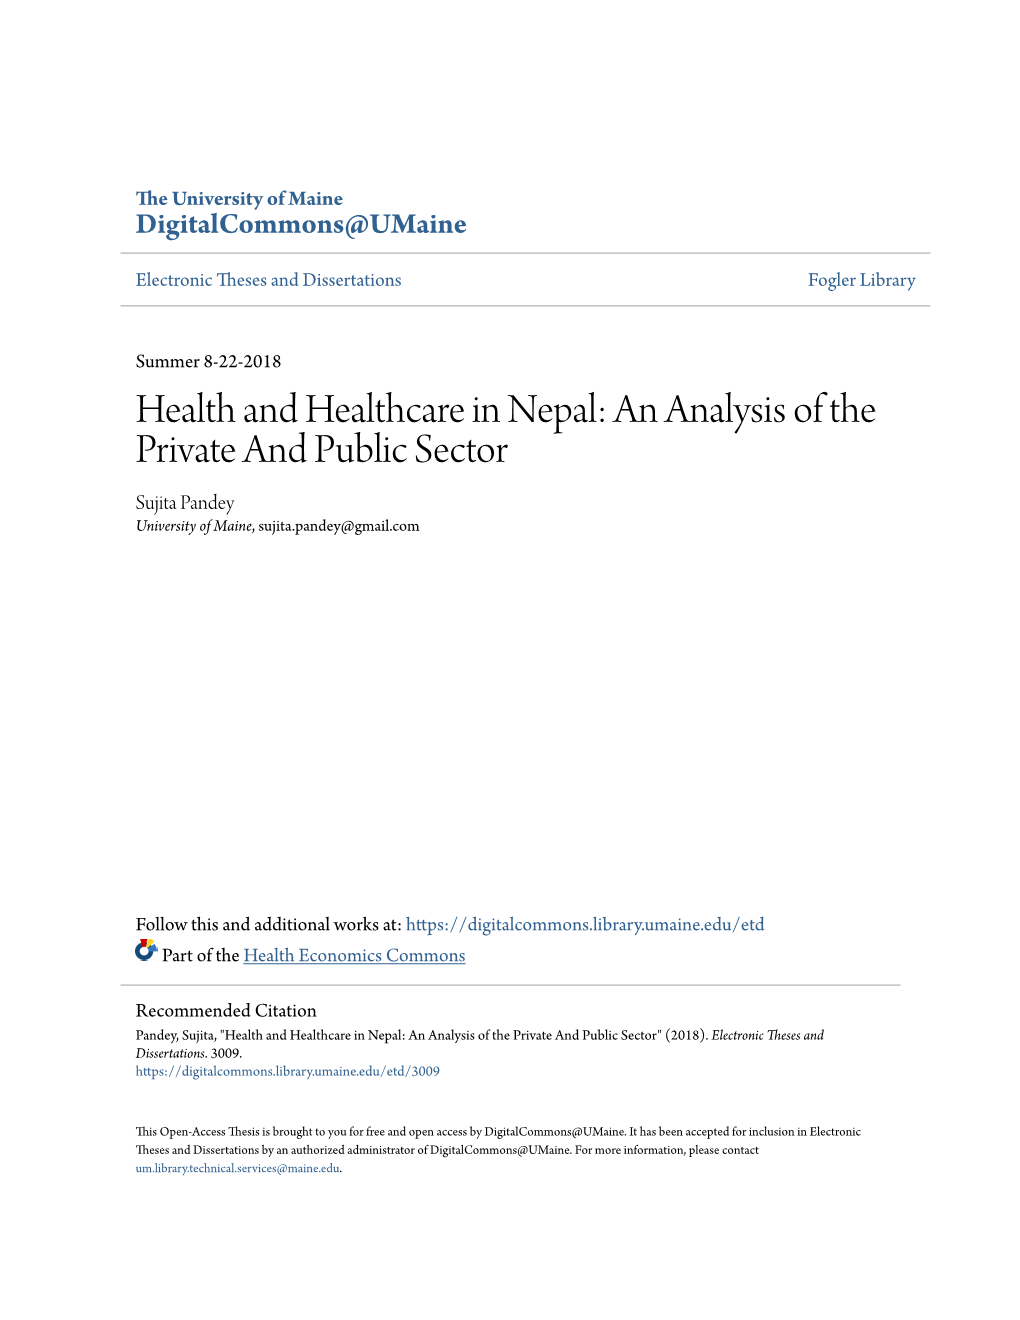 Health and Healthcare in Nepal: an Analysis of the Private and Public Sector Sujita Pandey University of Maine, Sujita.Pandey@Gmail.Com